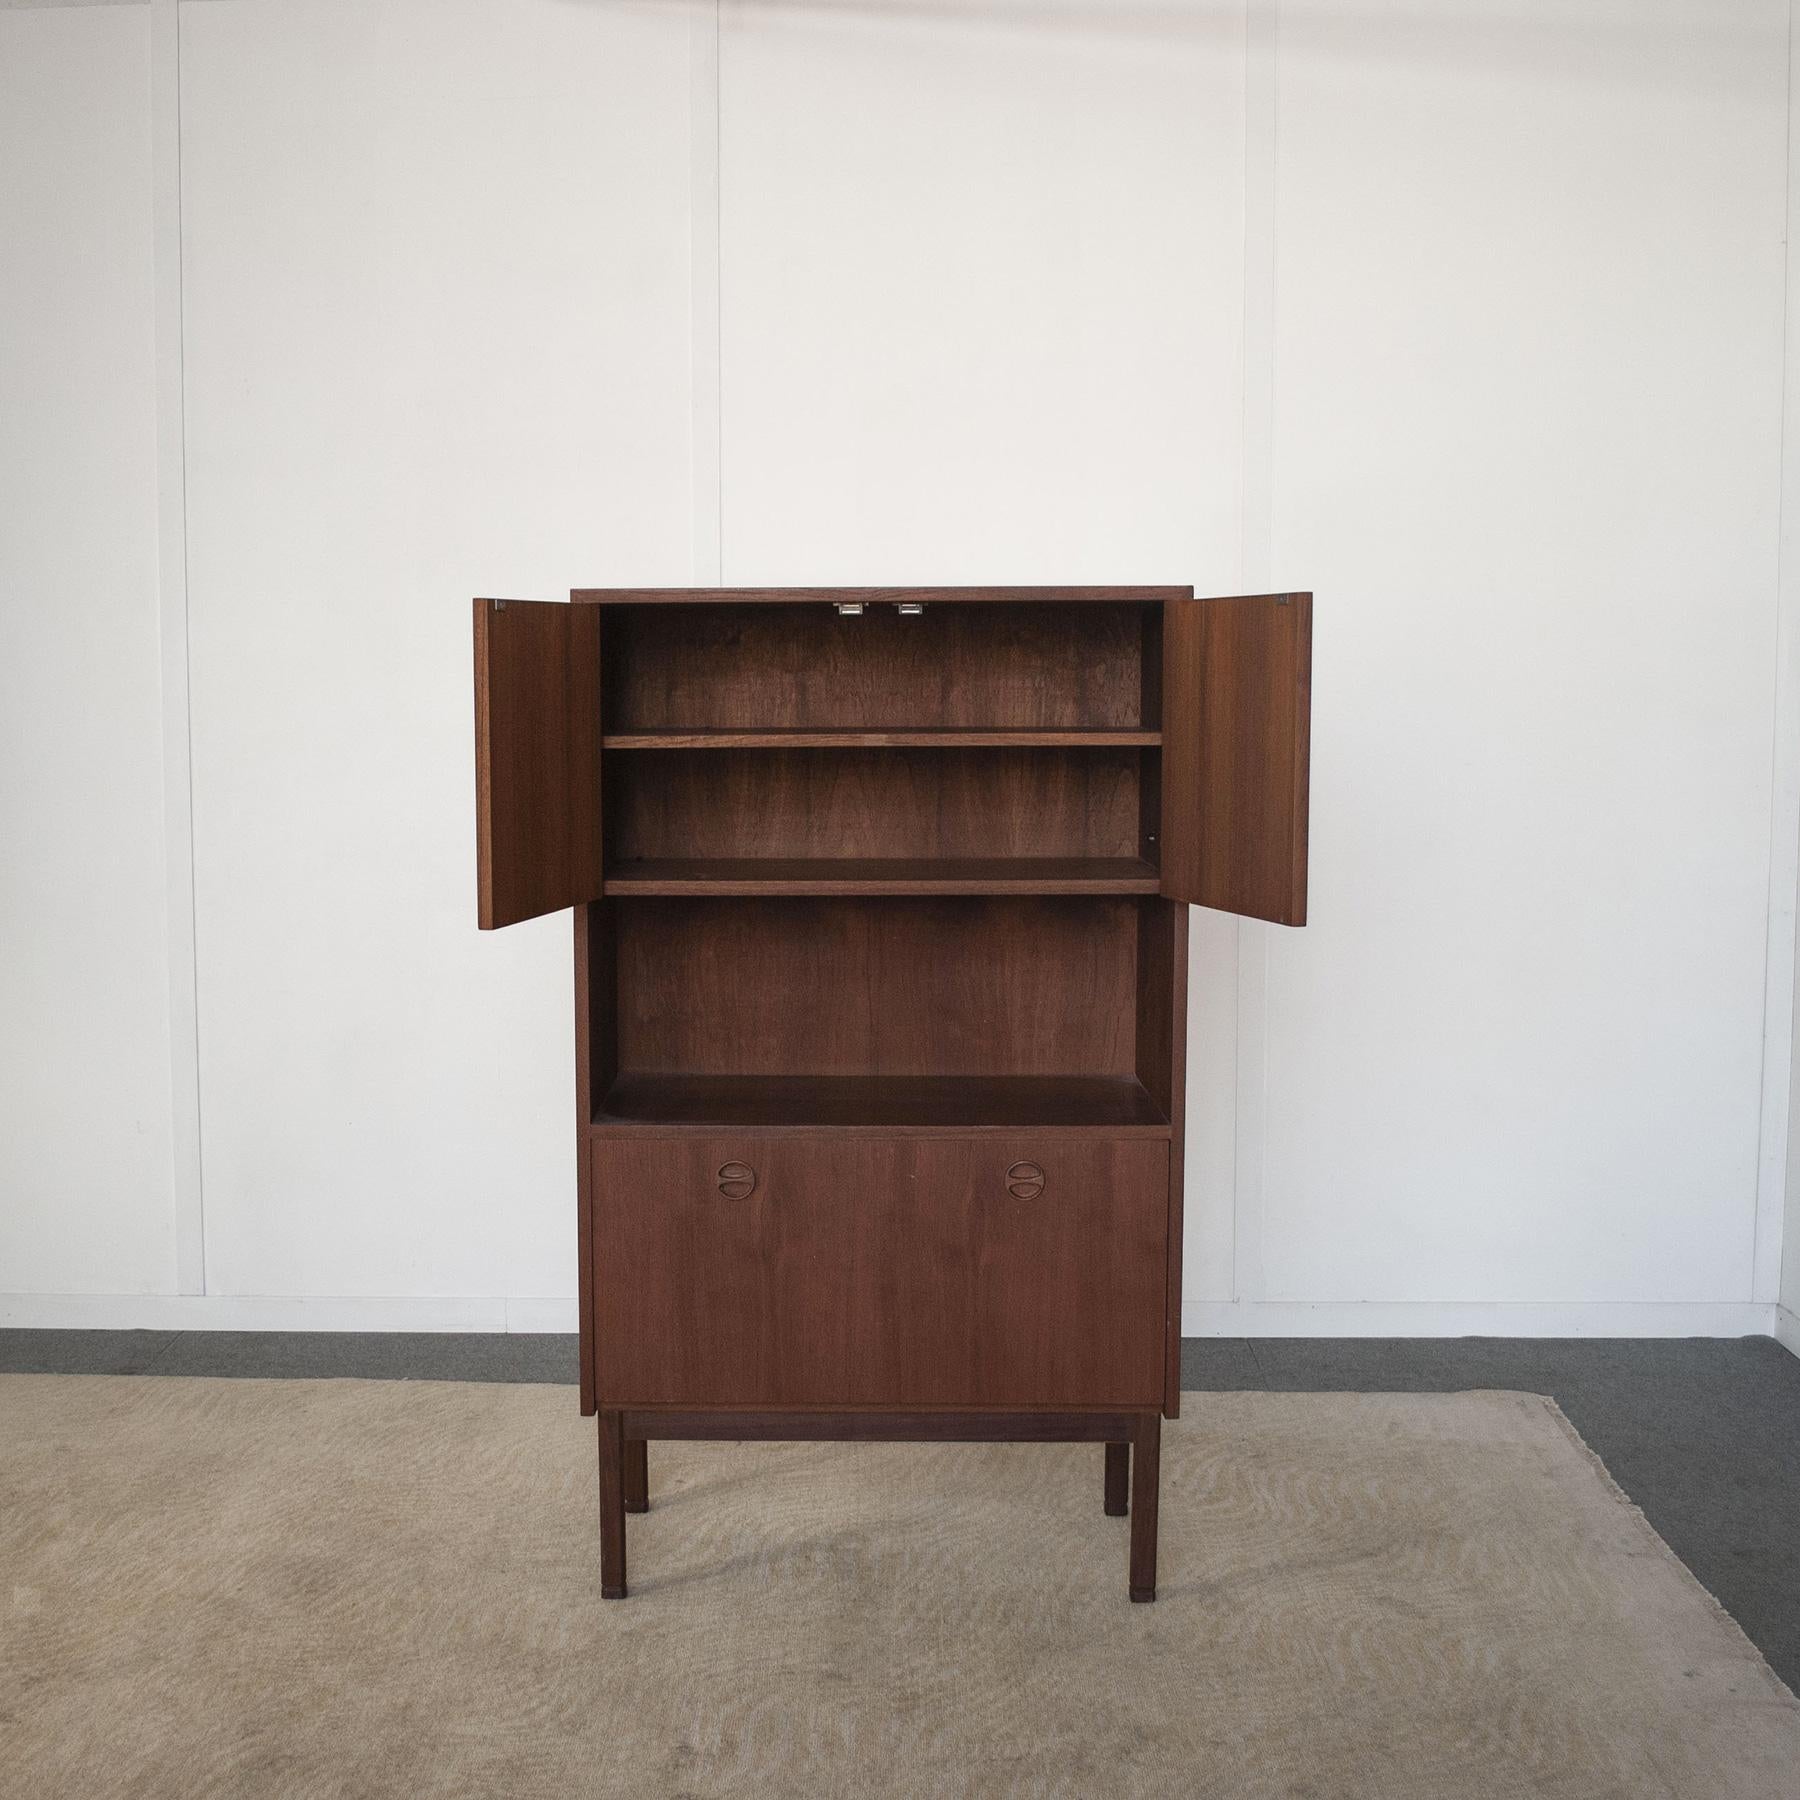 Teak wood Highboard consisting of three closed storage compartments and one door display unit designer Peter Hvidt, 1960s Danish production.